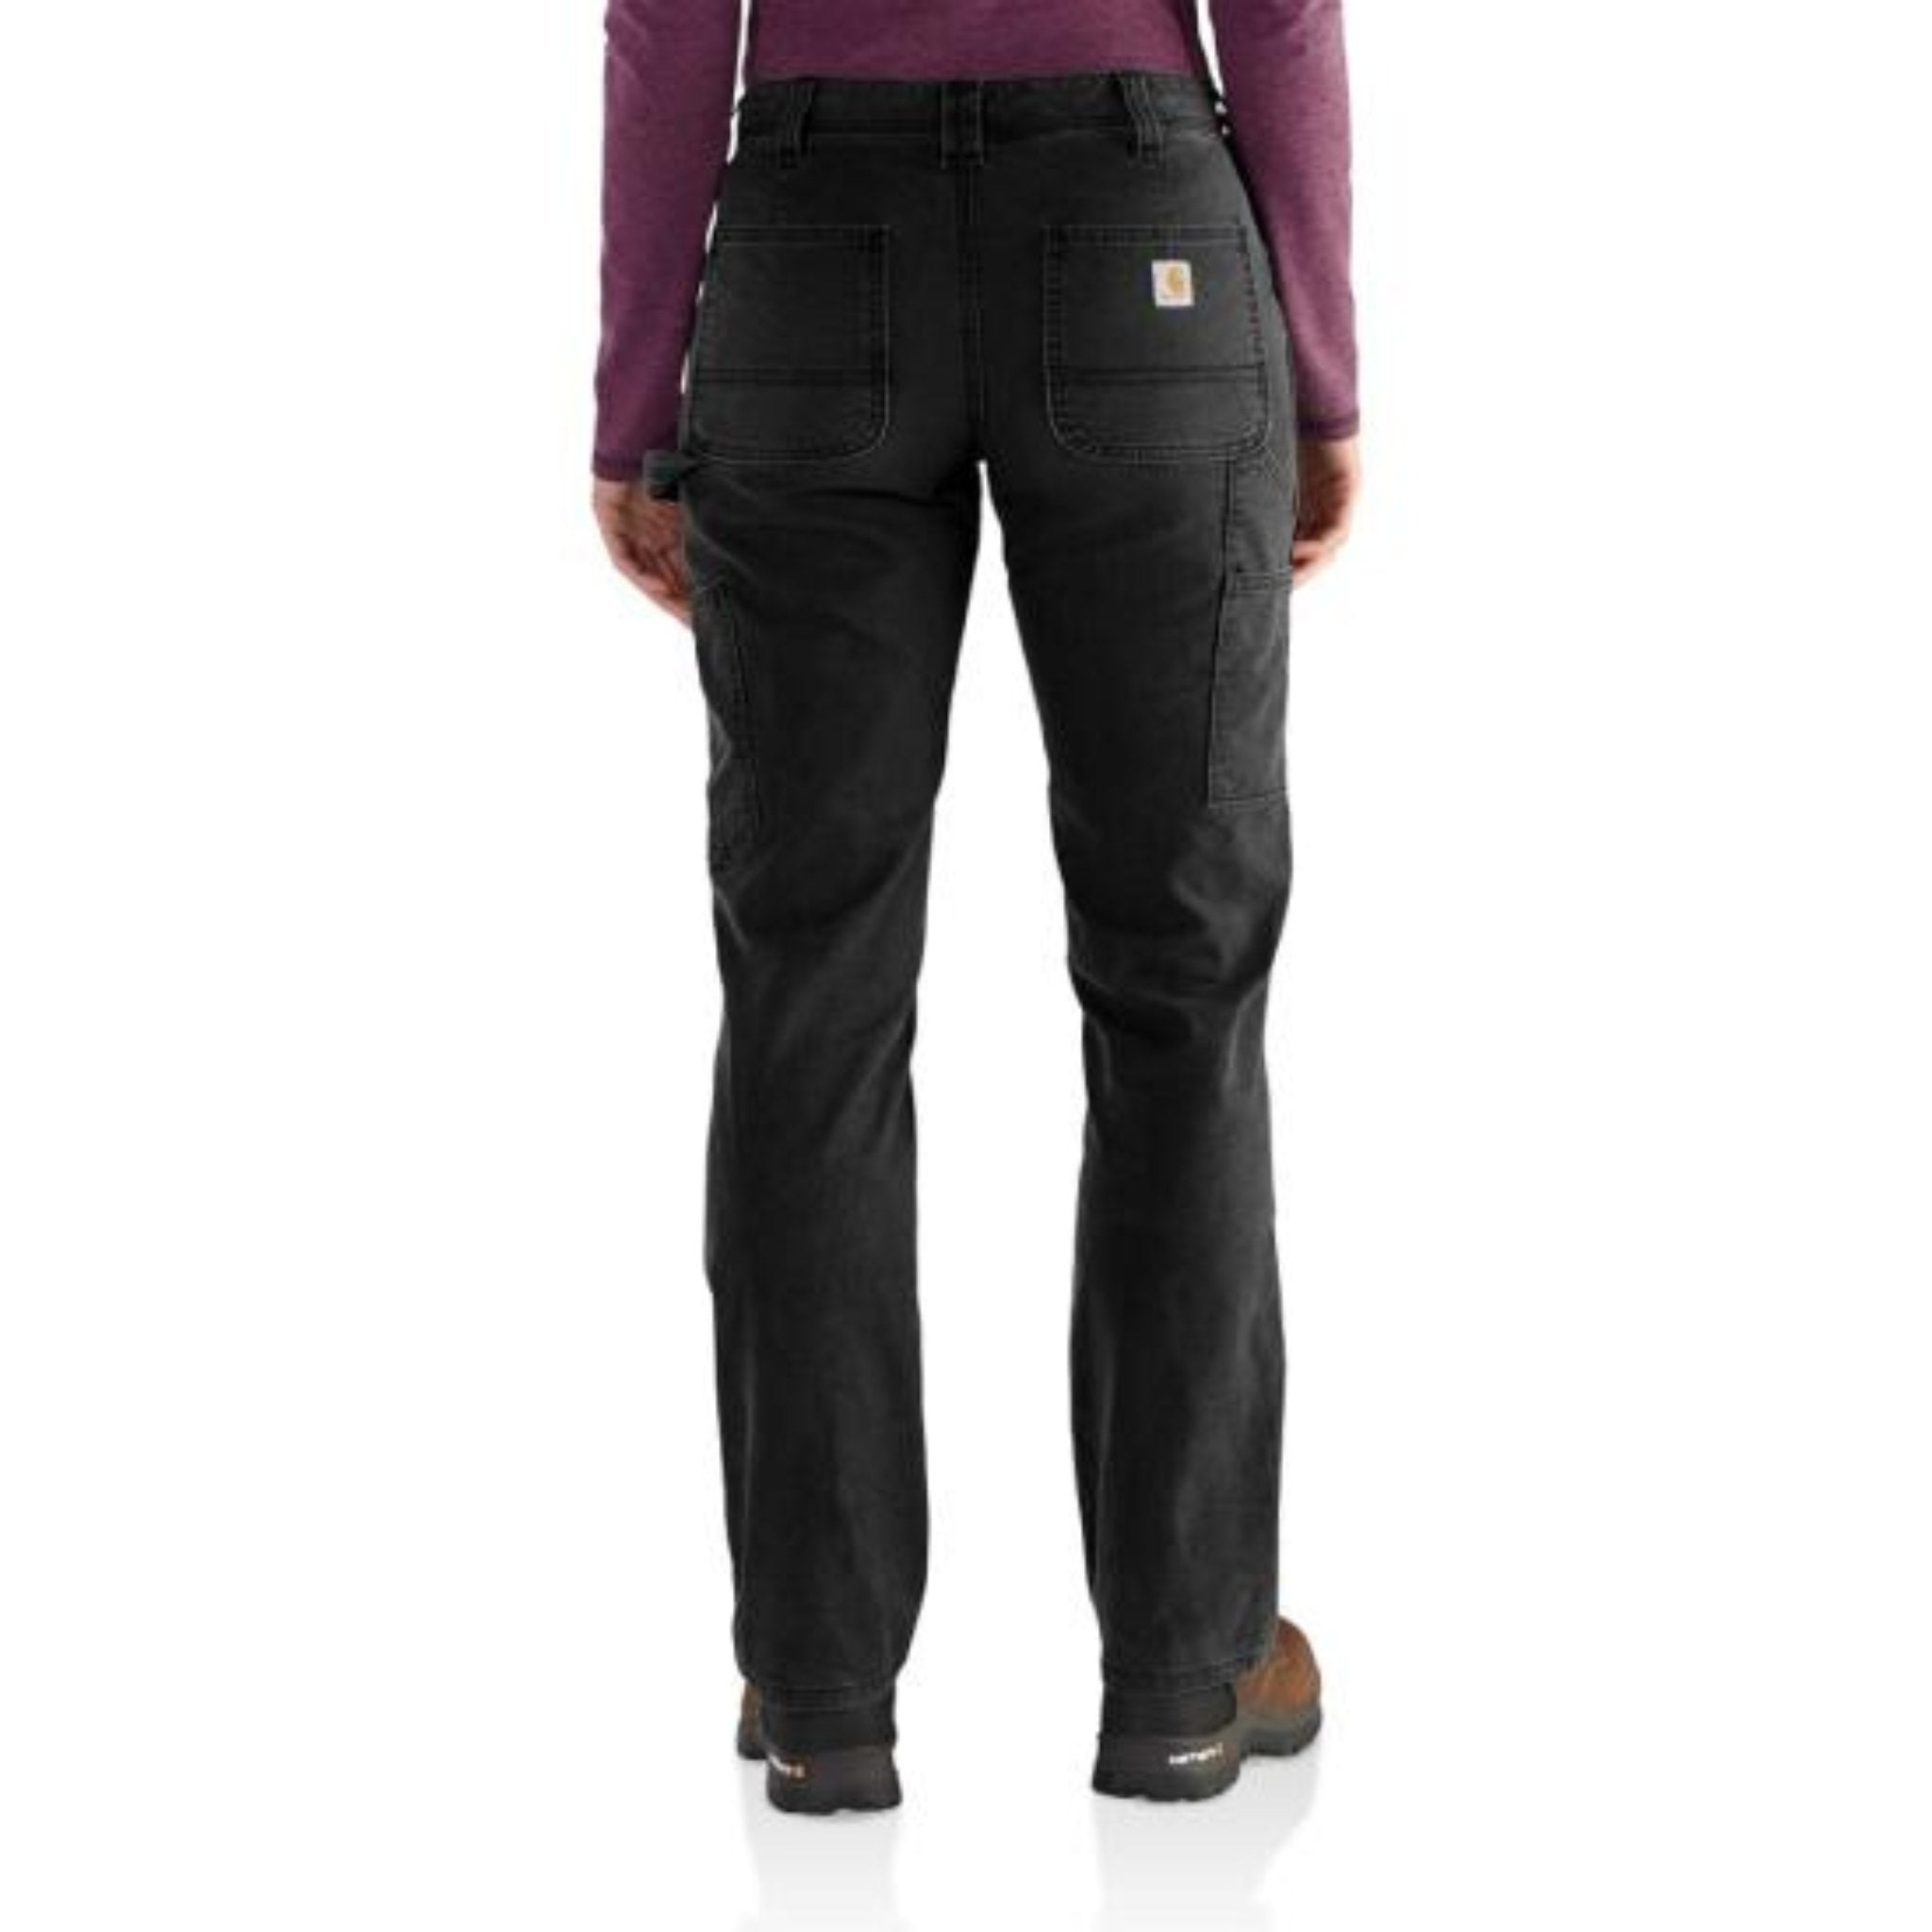 Carhartt Women's Crawford Double Front Pant - Black